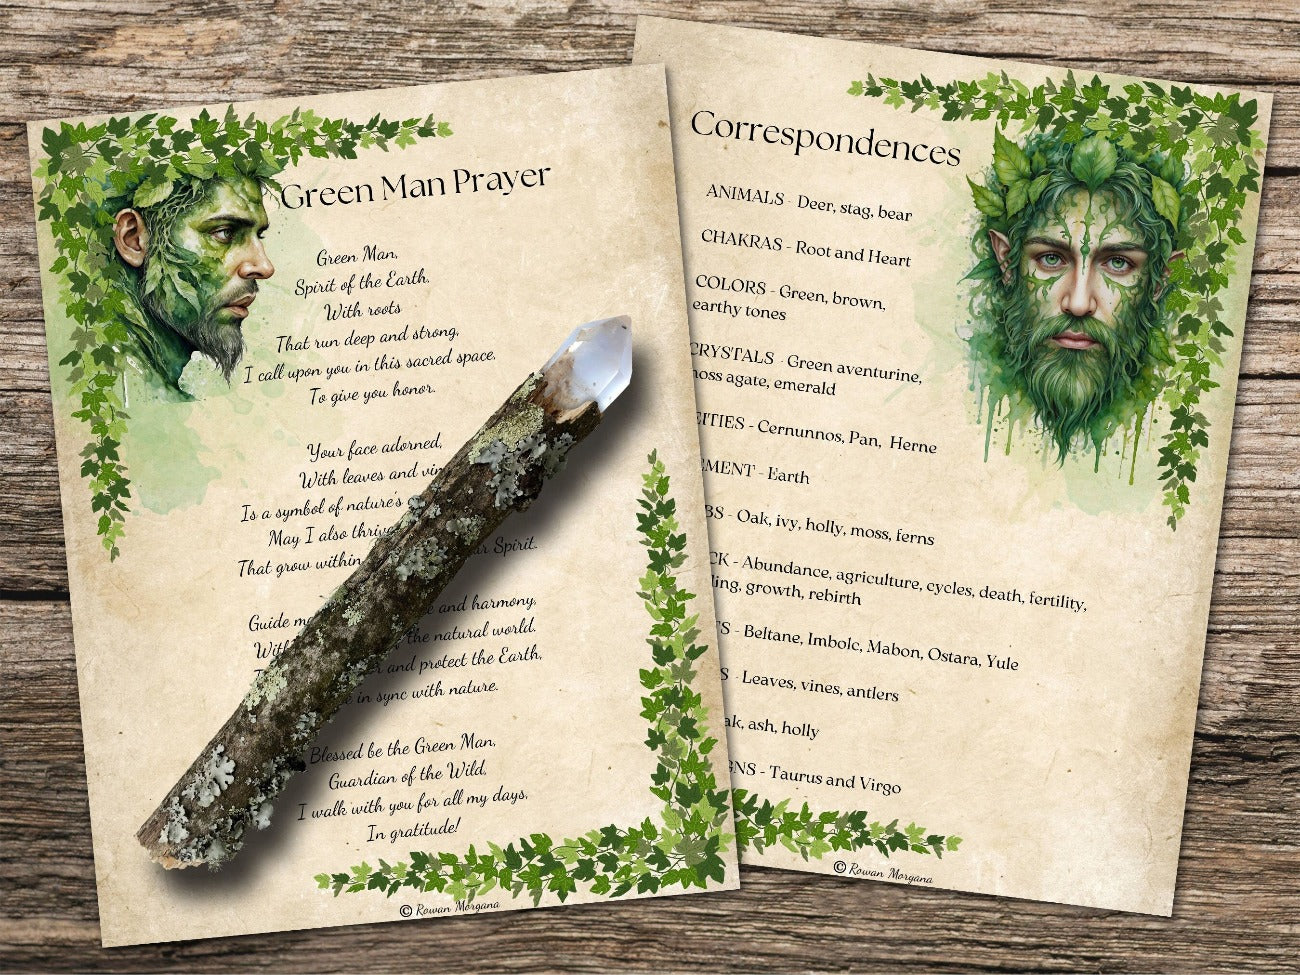 THE GREEN MAN, Parchment Background, Green Man Prayer and Green Man Magical Correspondences pages with leafy green vine borders and fine art images of the Green Man - Morgana Magick Spell